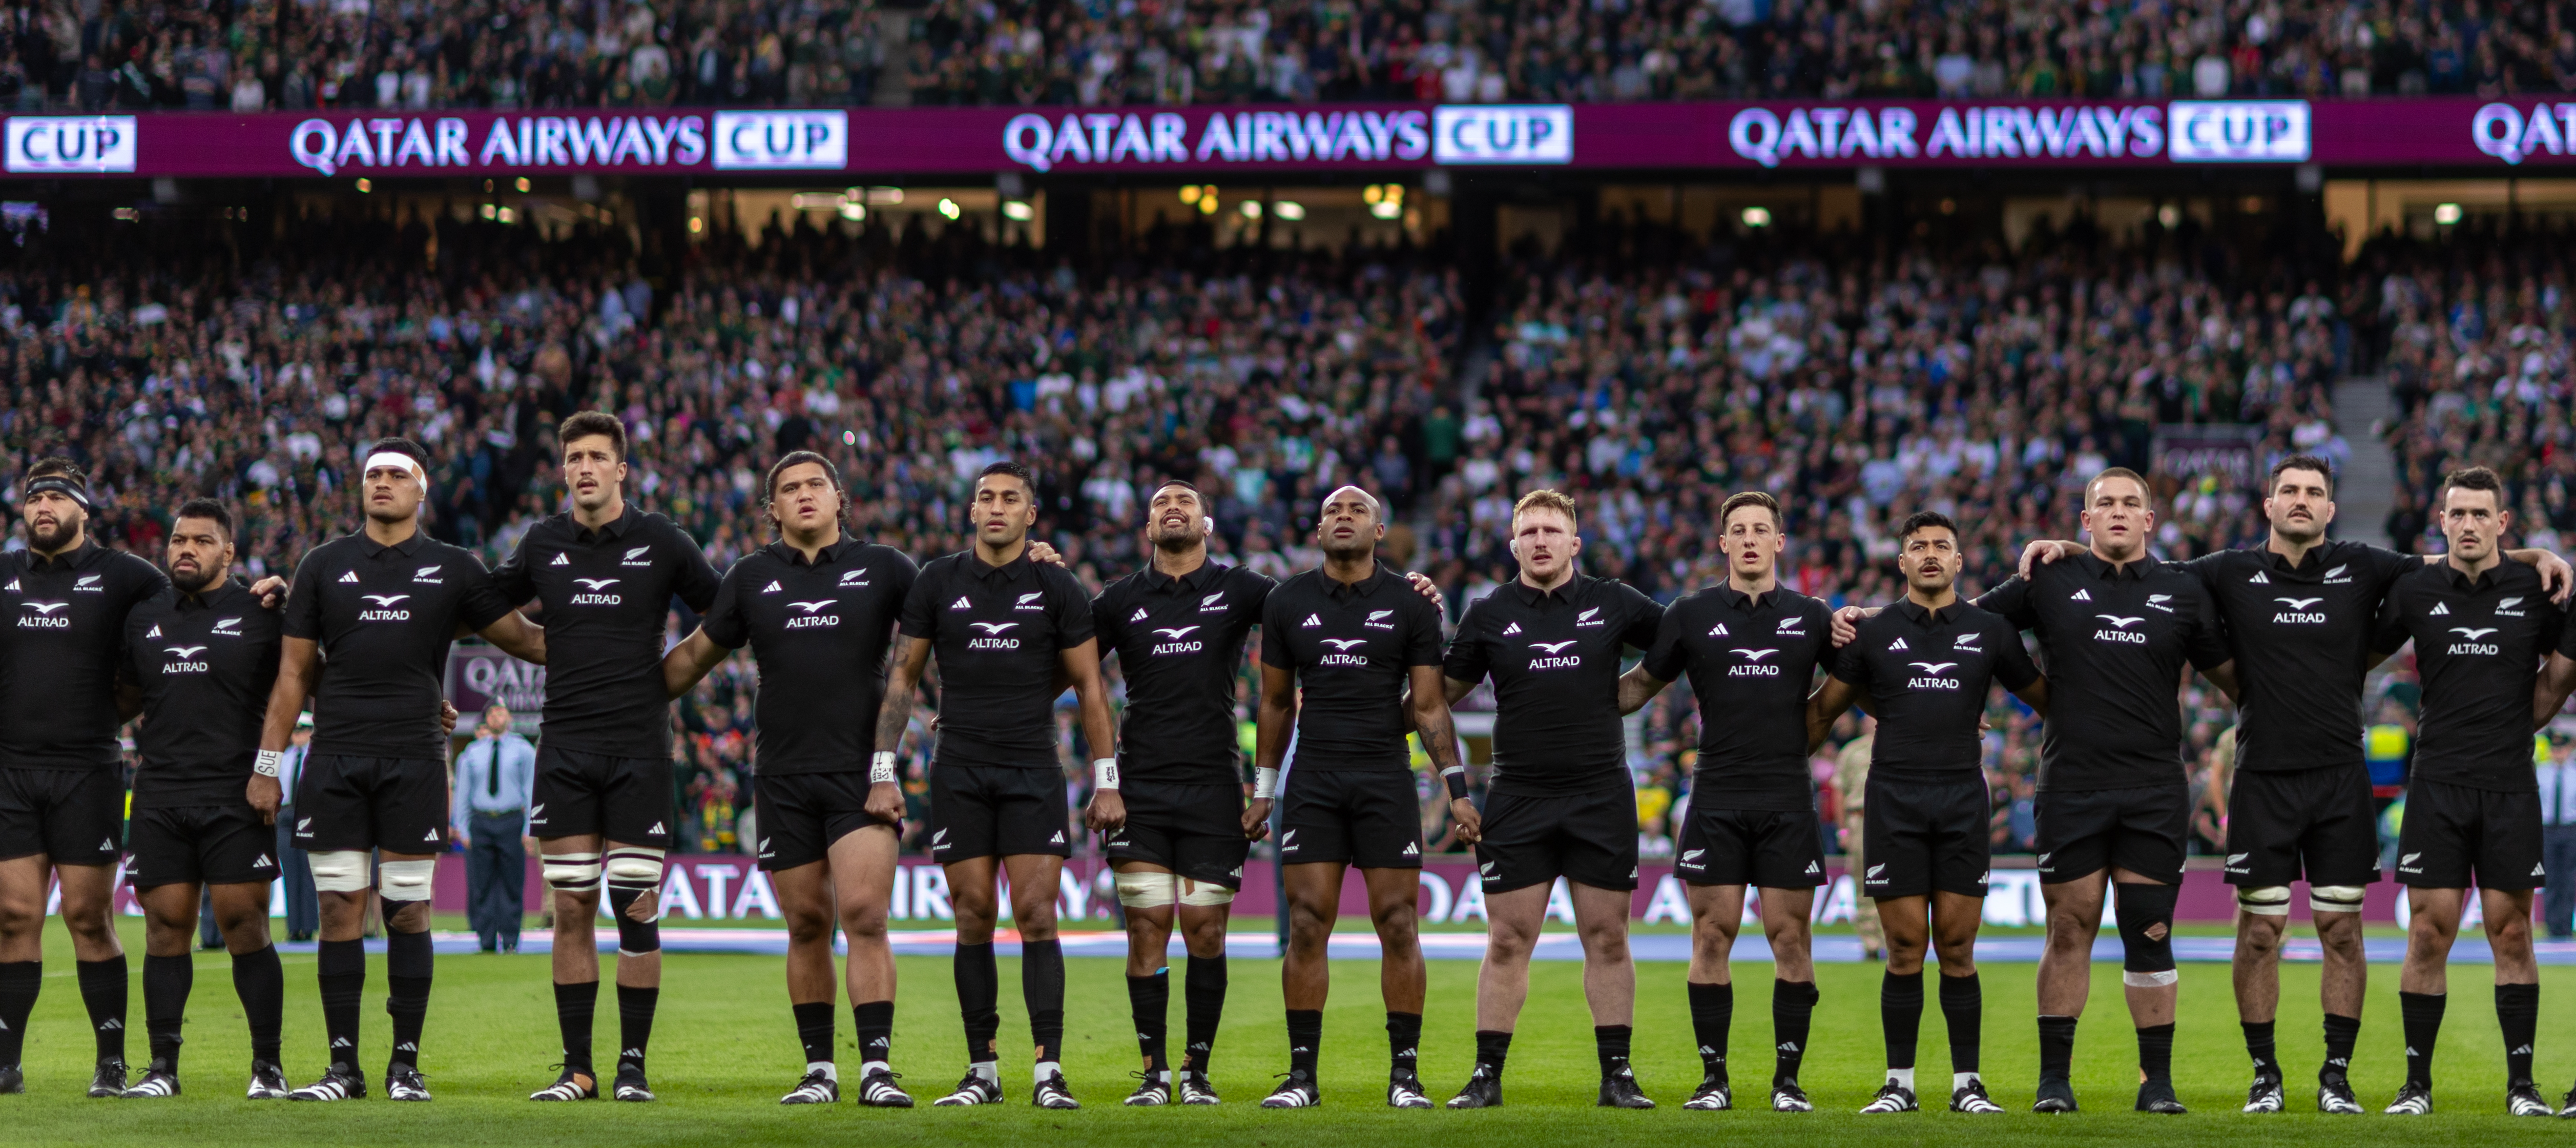 Watch: All Blacks 2023 World Cup squad named